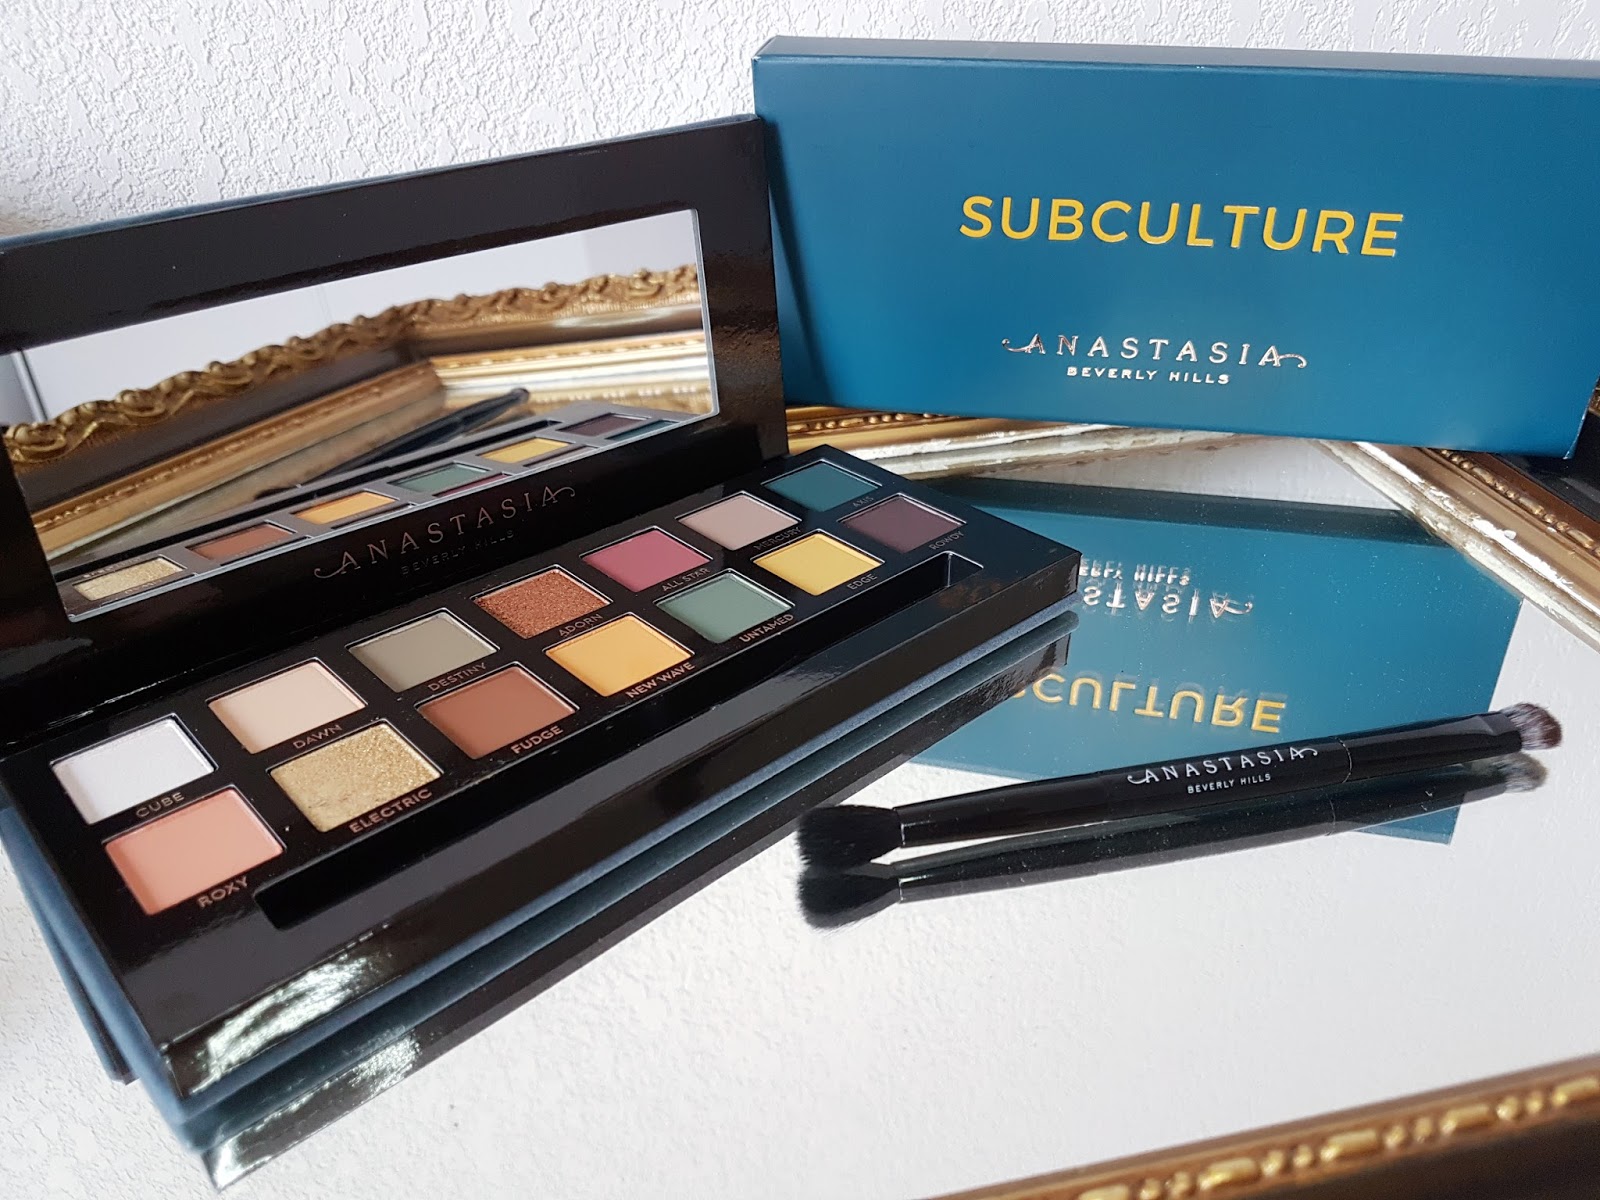 revue-palette-subculture-anastasia-beverly-hills-swatch-idee-makeup-marion-cameleon-mama-syca-beaute